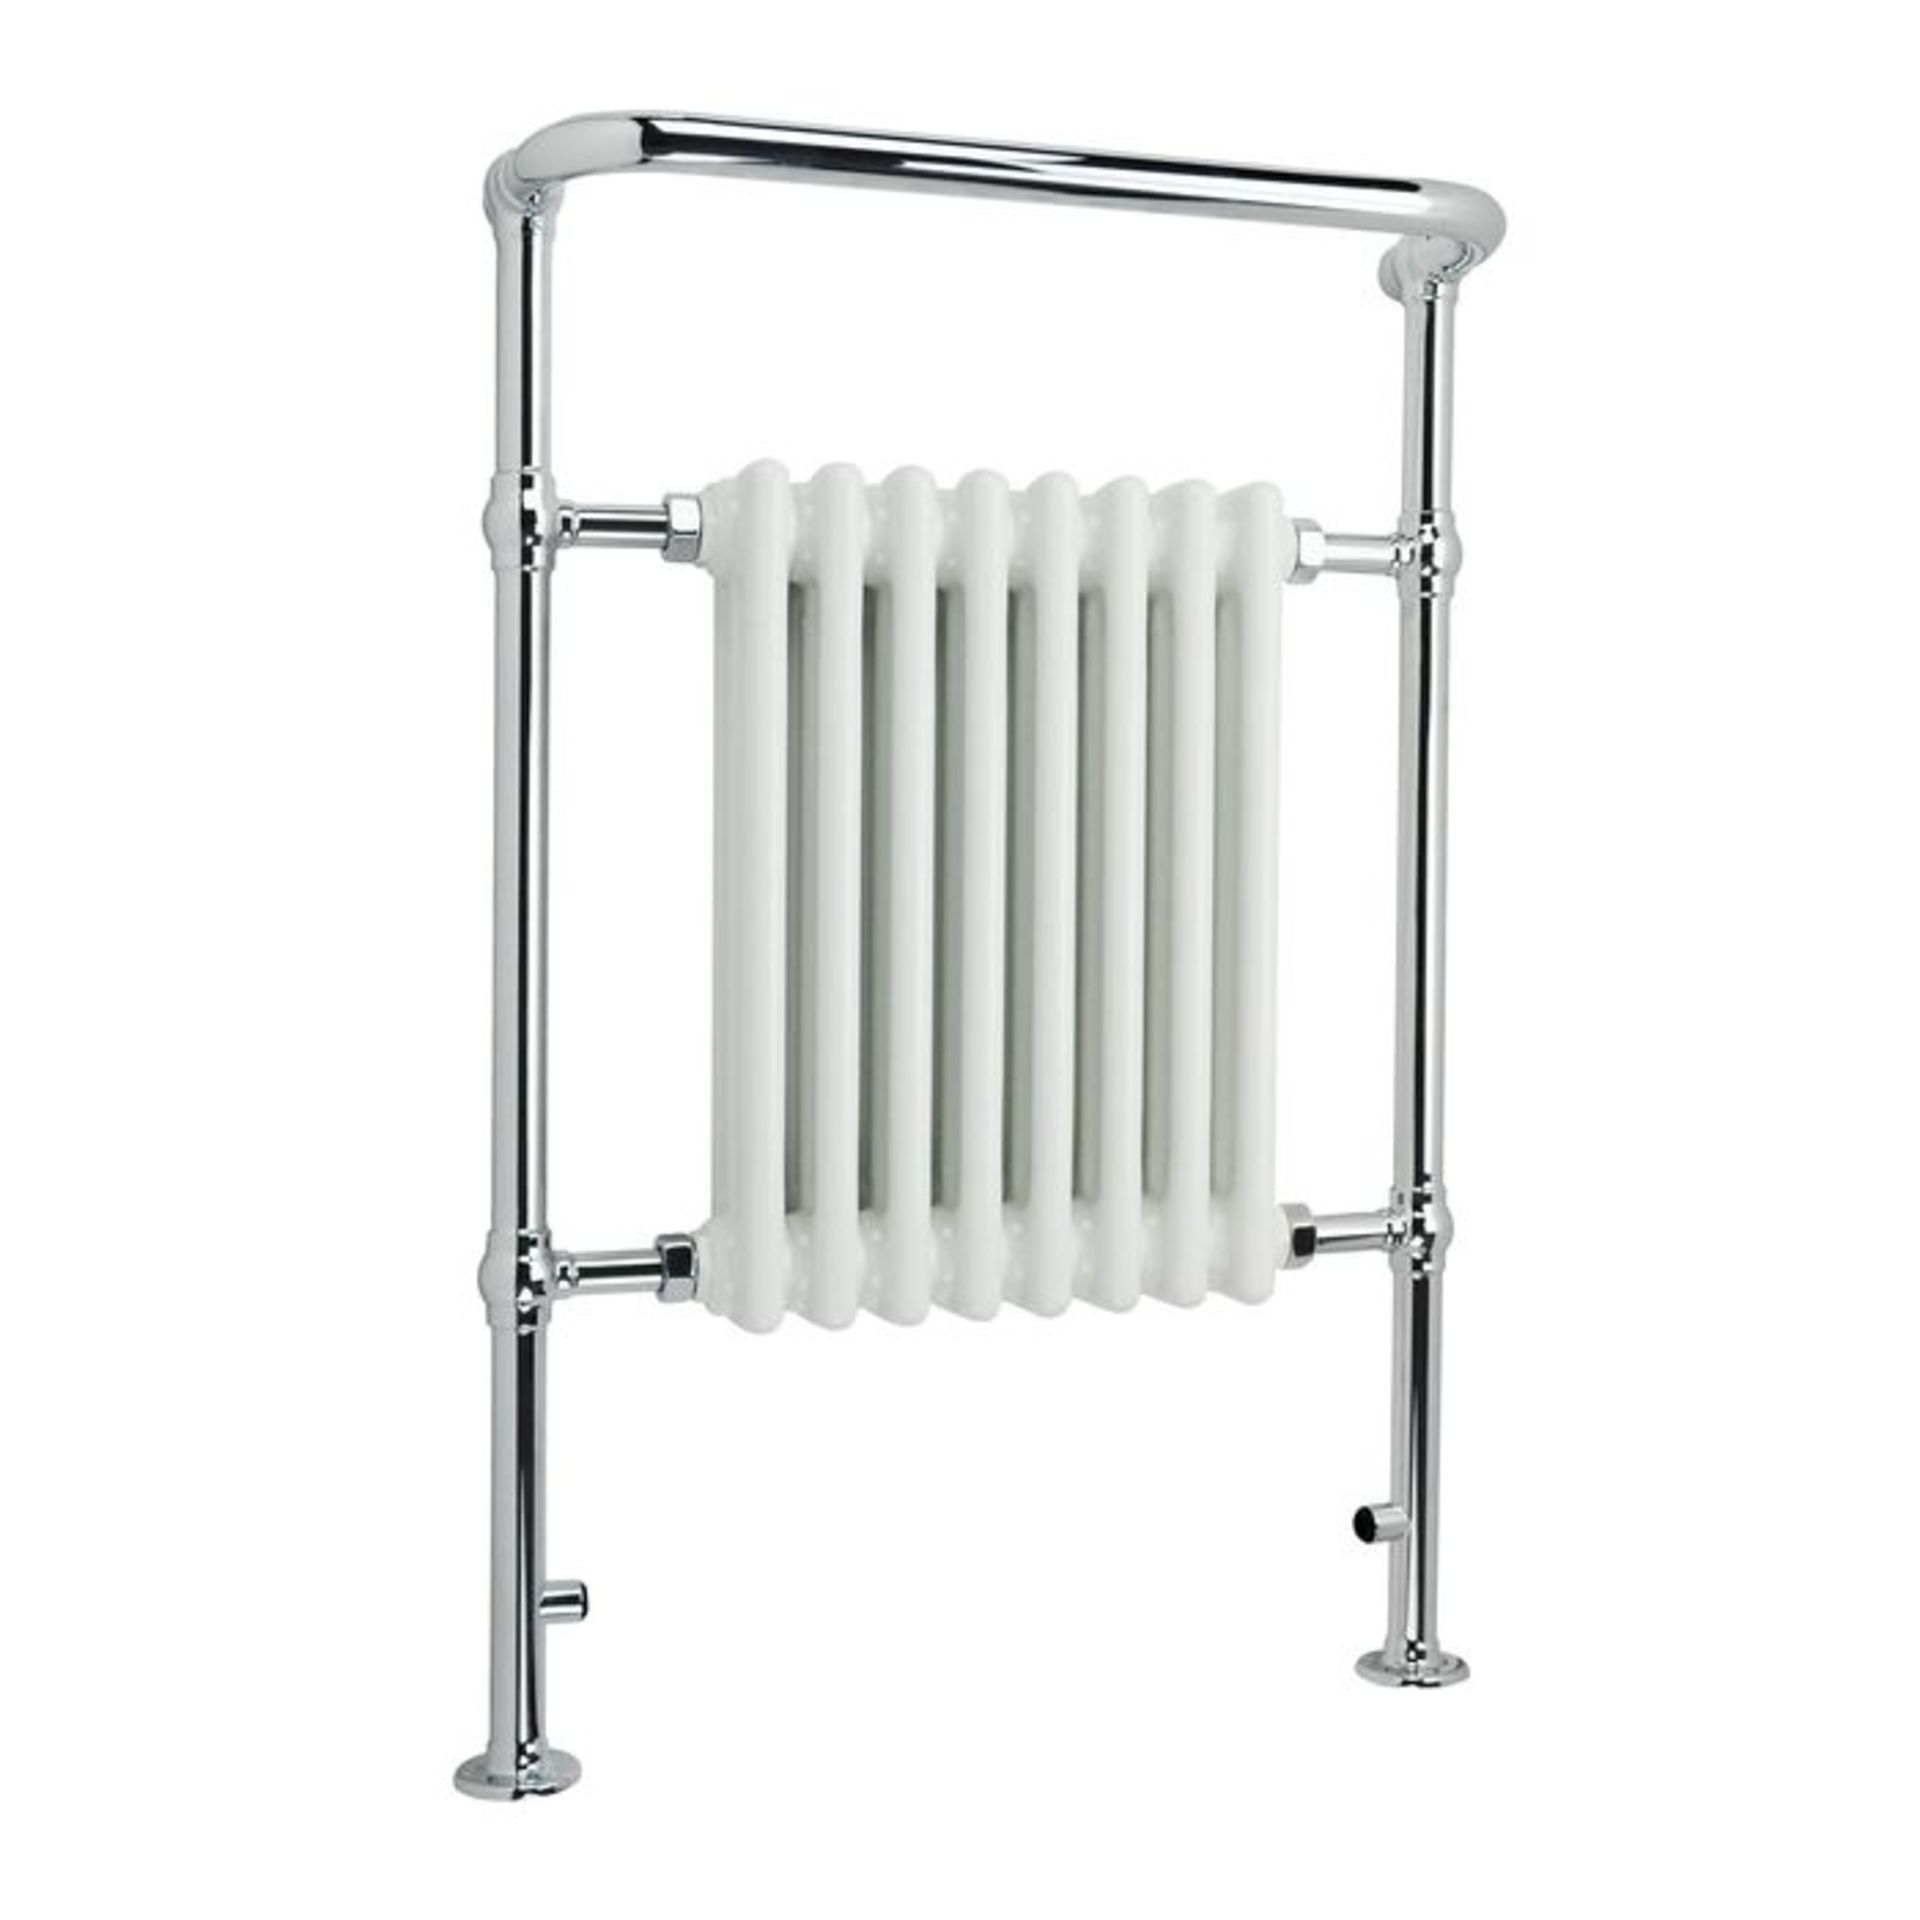 (HM117) 952x659mm Large Traditional White Premium Towel Rail Radiator. We love this because it... - Image 3 of 3